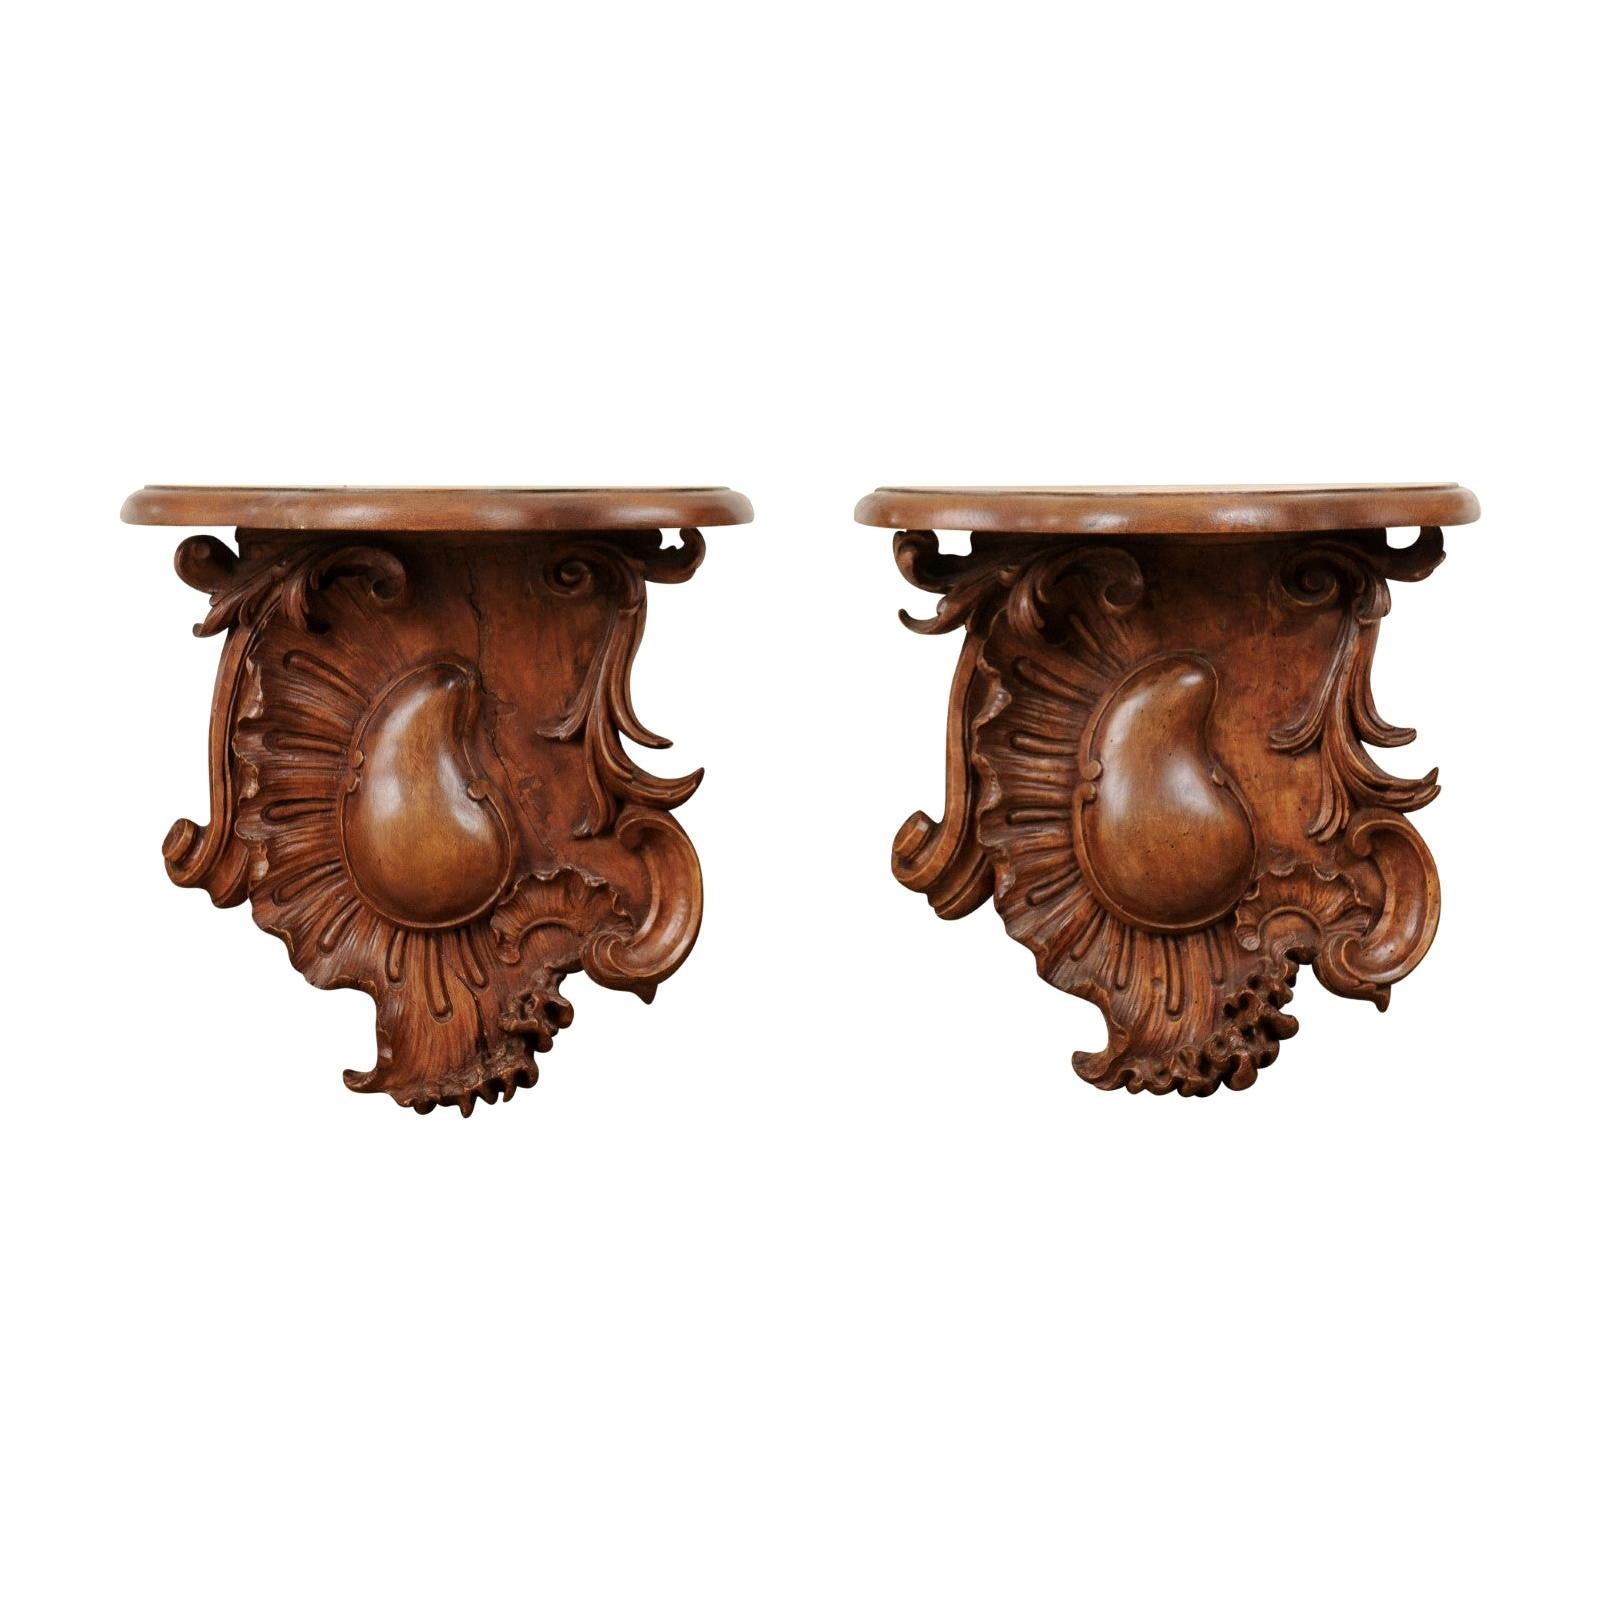 Pair of French 1760s Louis XV Period Walnut Wall Brackets with Rocailles Motifs